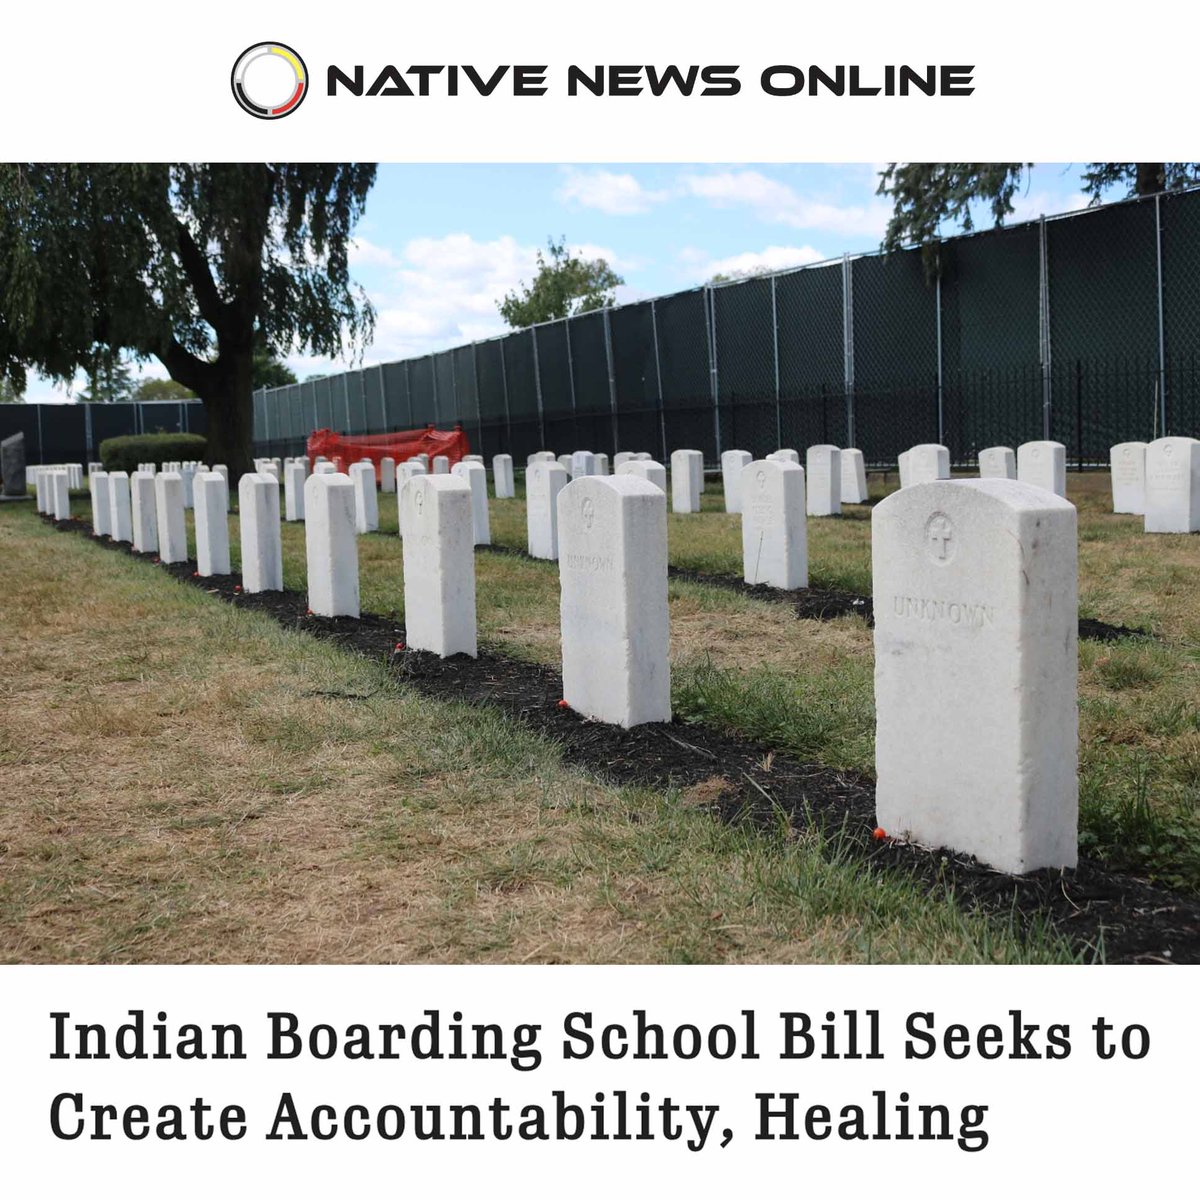 The Truth and Healing Commission on Indian Boarding School Policies Act of 2024 has been reintroduced. The act would establish a commission of former Indian boarding school students and experts to investigate the true histories of #IndianBoardingSchools: bit.ly/4bCvaqb